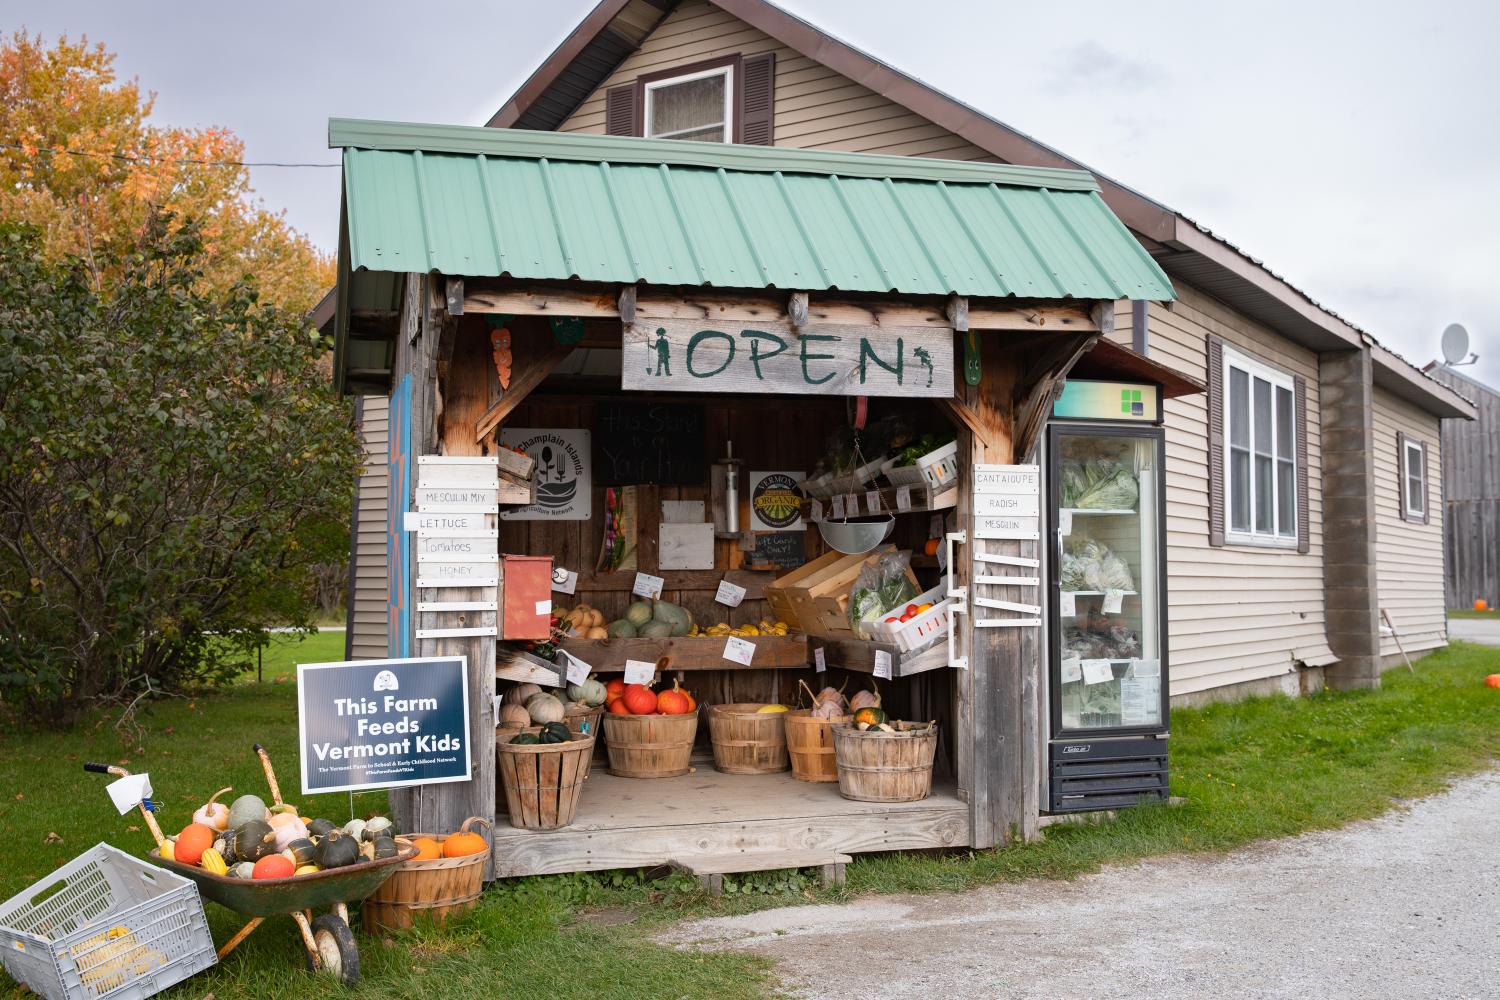 The Darby Farmstand in Alburgh, Vermont brimming with fall squash, greens, peppers, and more.